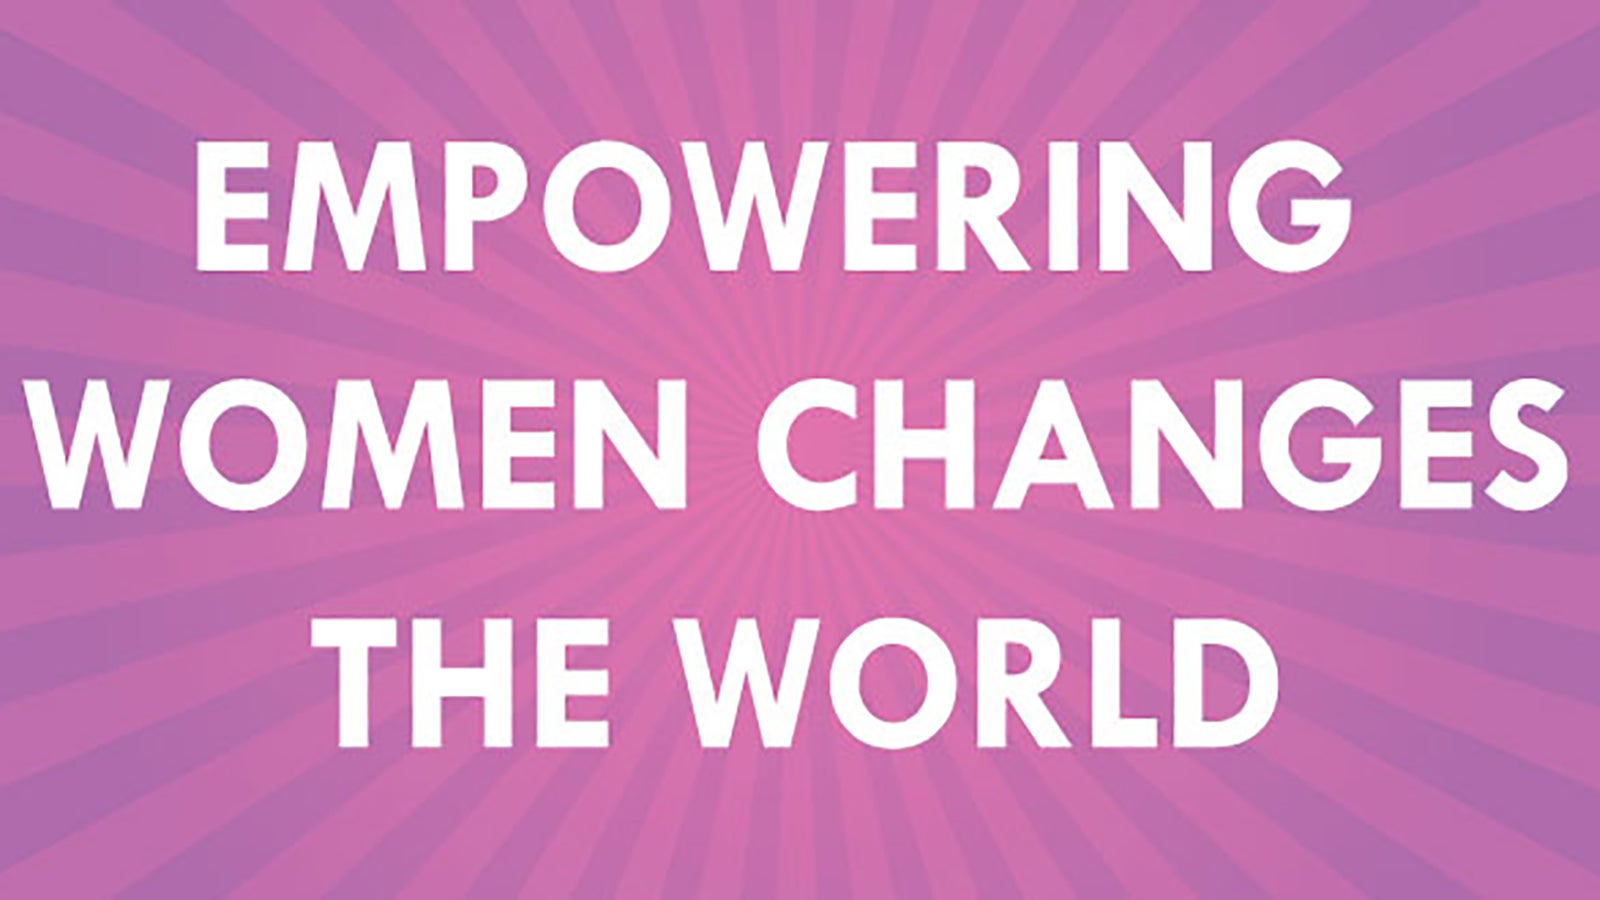 the words: 'Empowering women changes the world, on an purple background